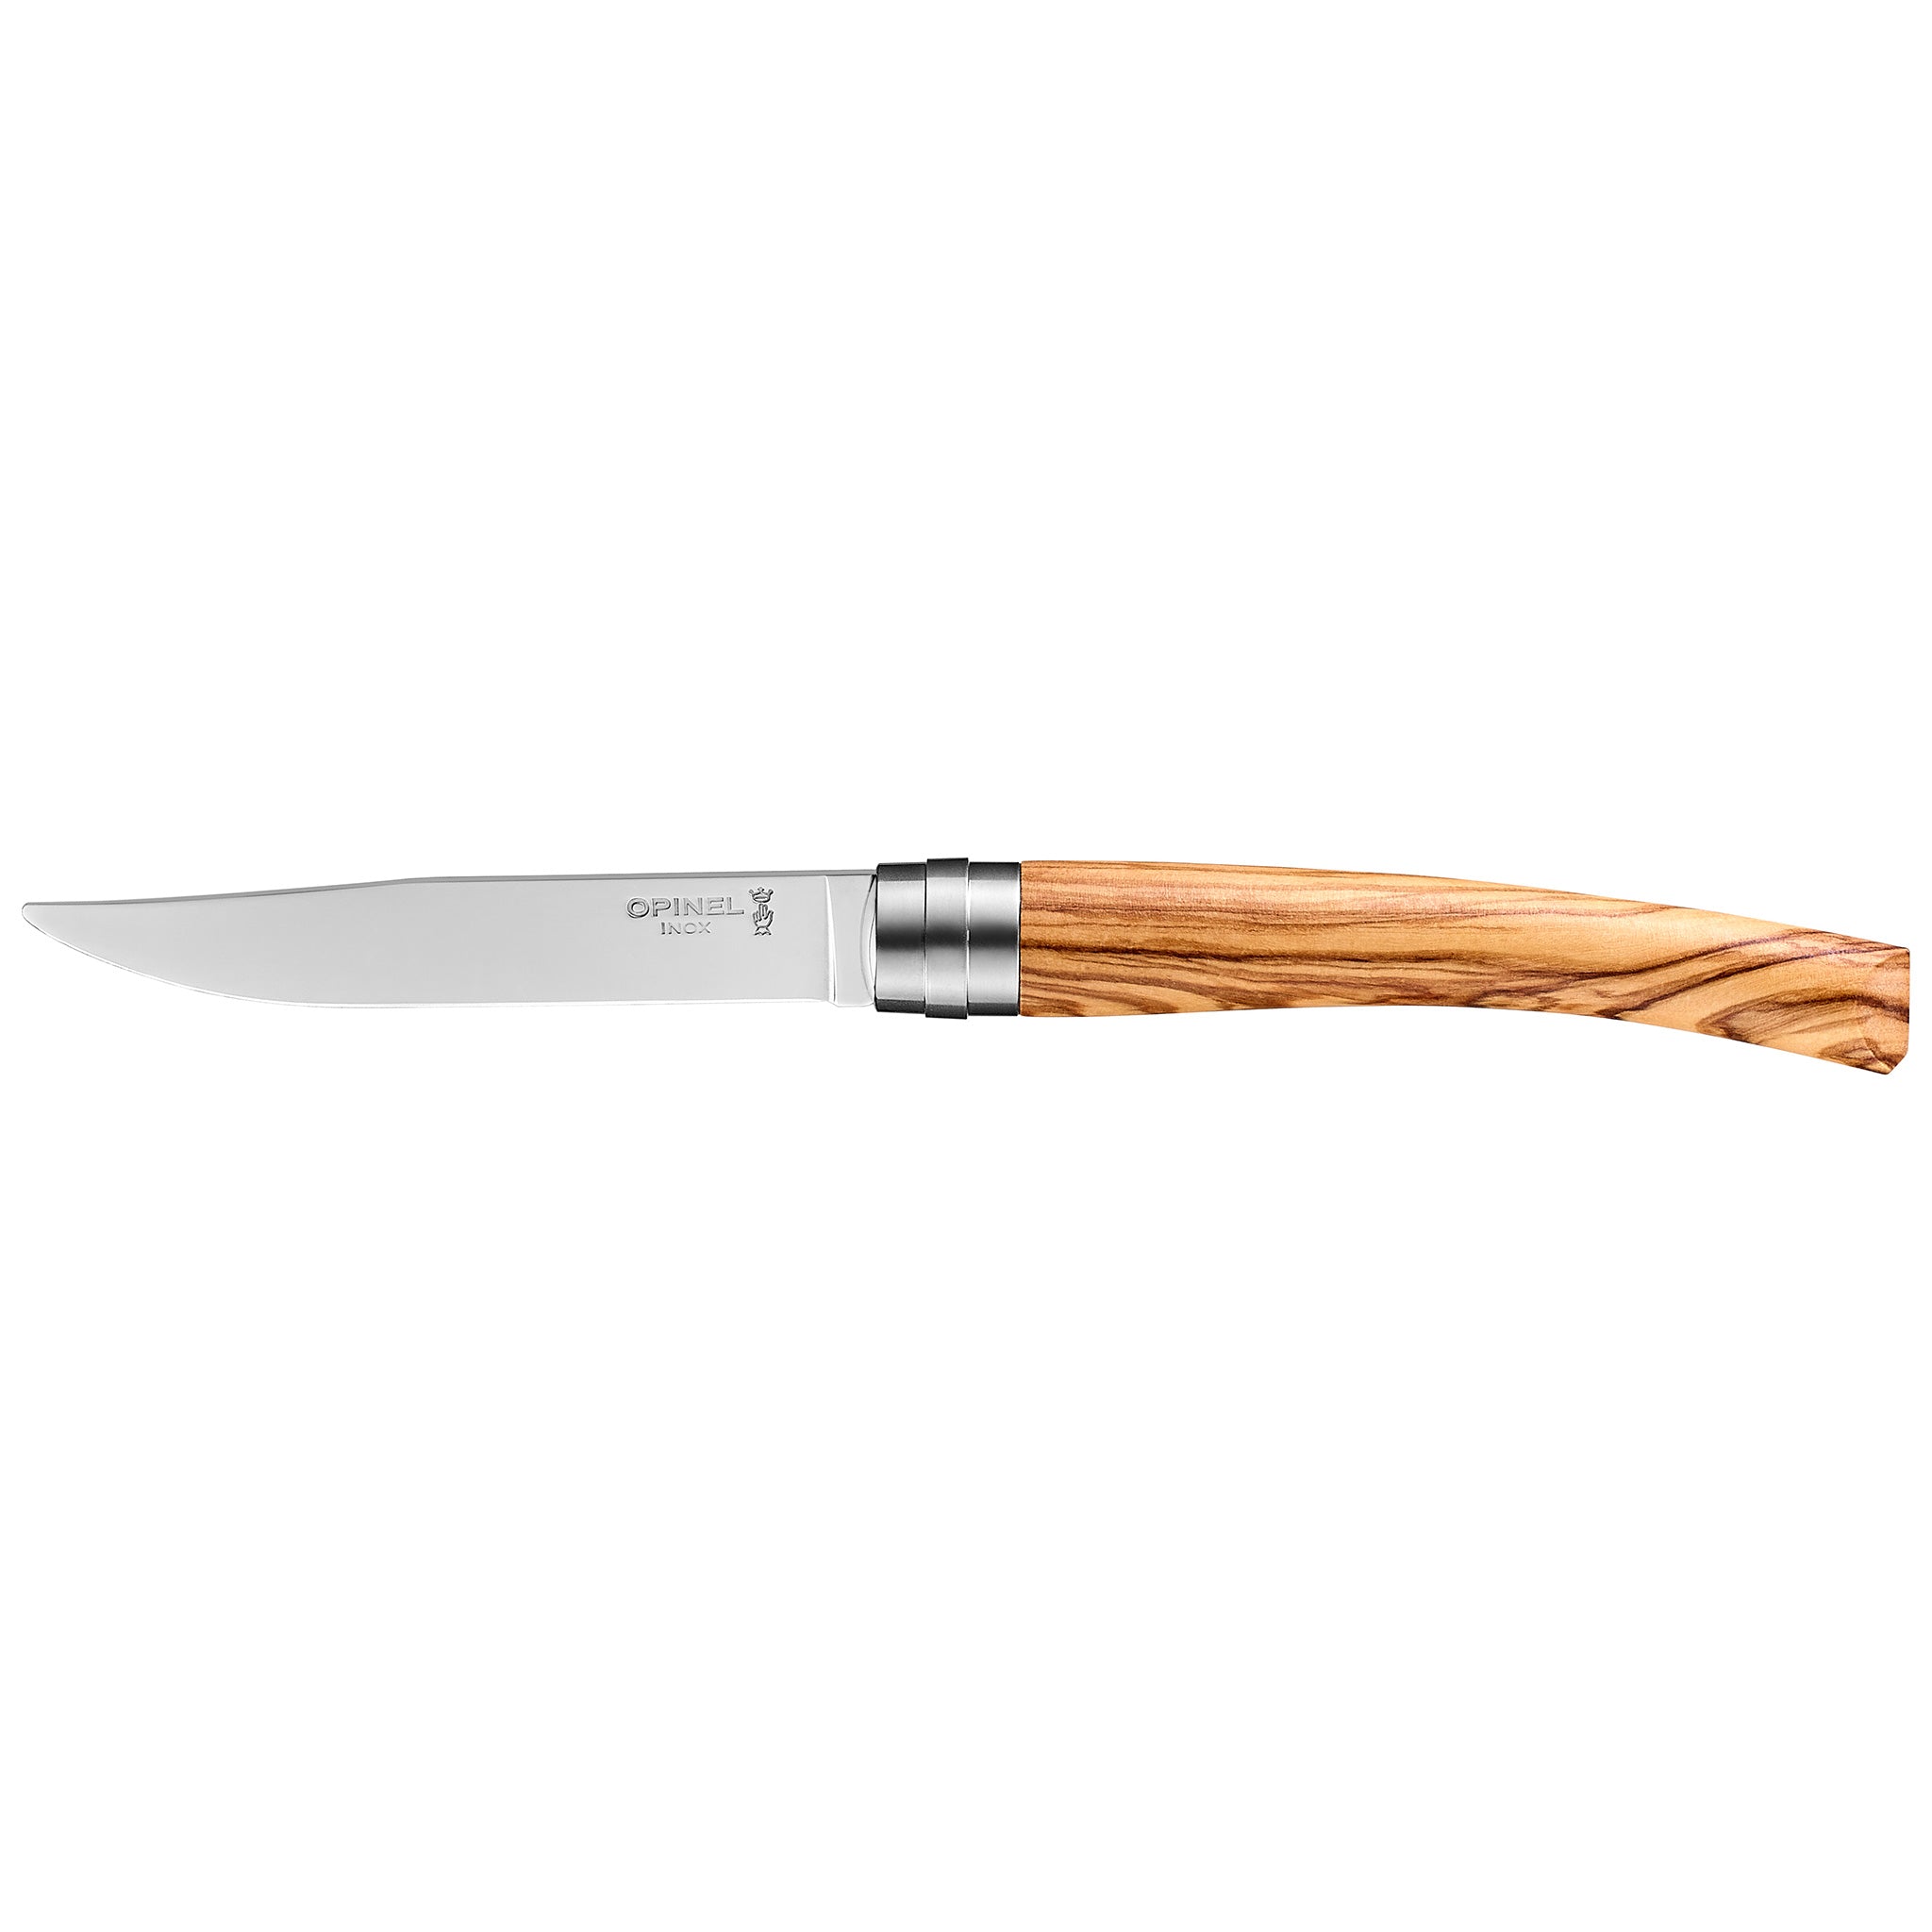 Opinel | Table Chic Box Set of 4 Steak Knives (Mirror Finish Blade) 10cm - Olive Wood